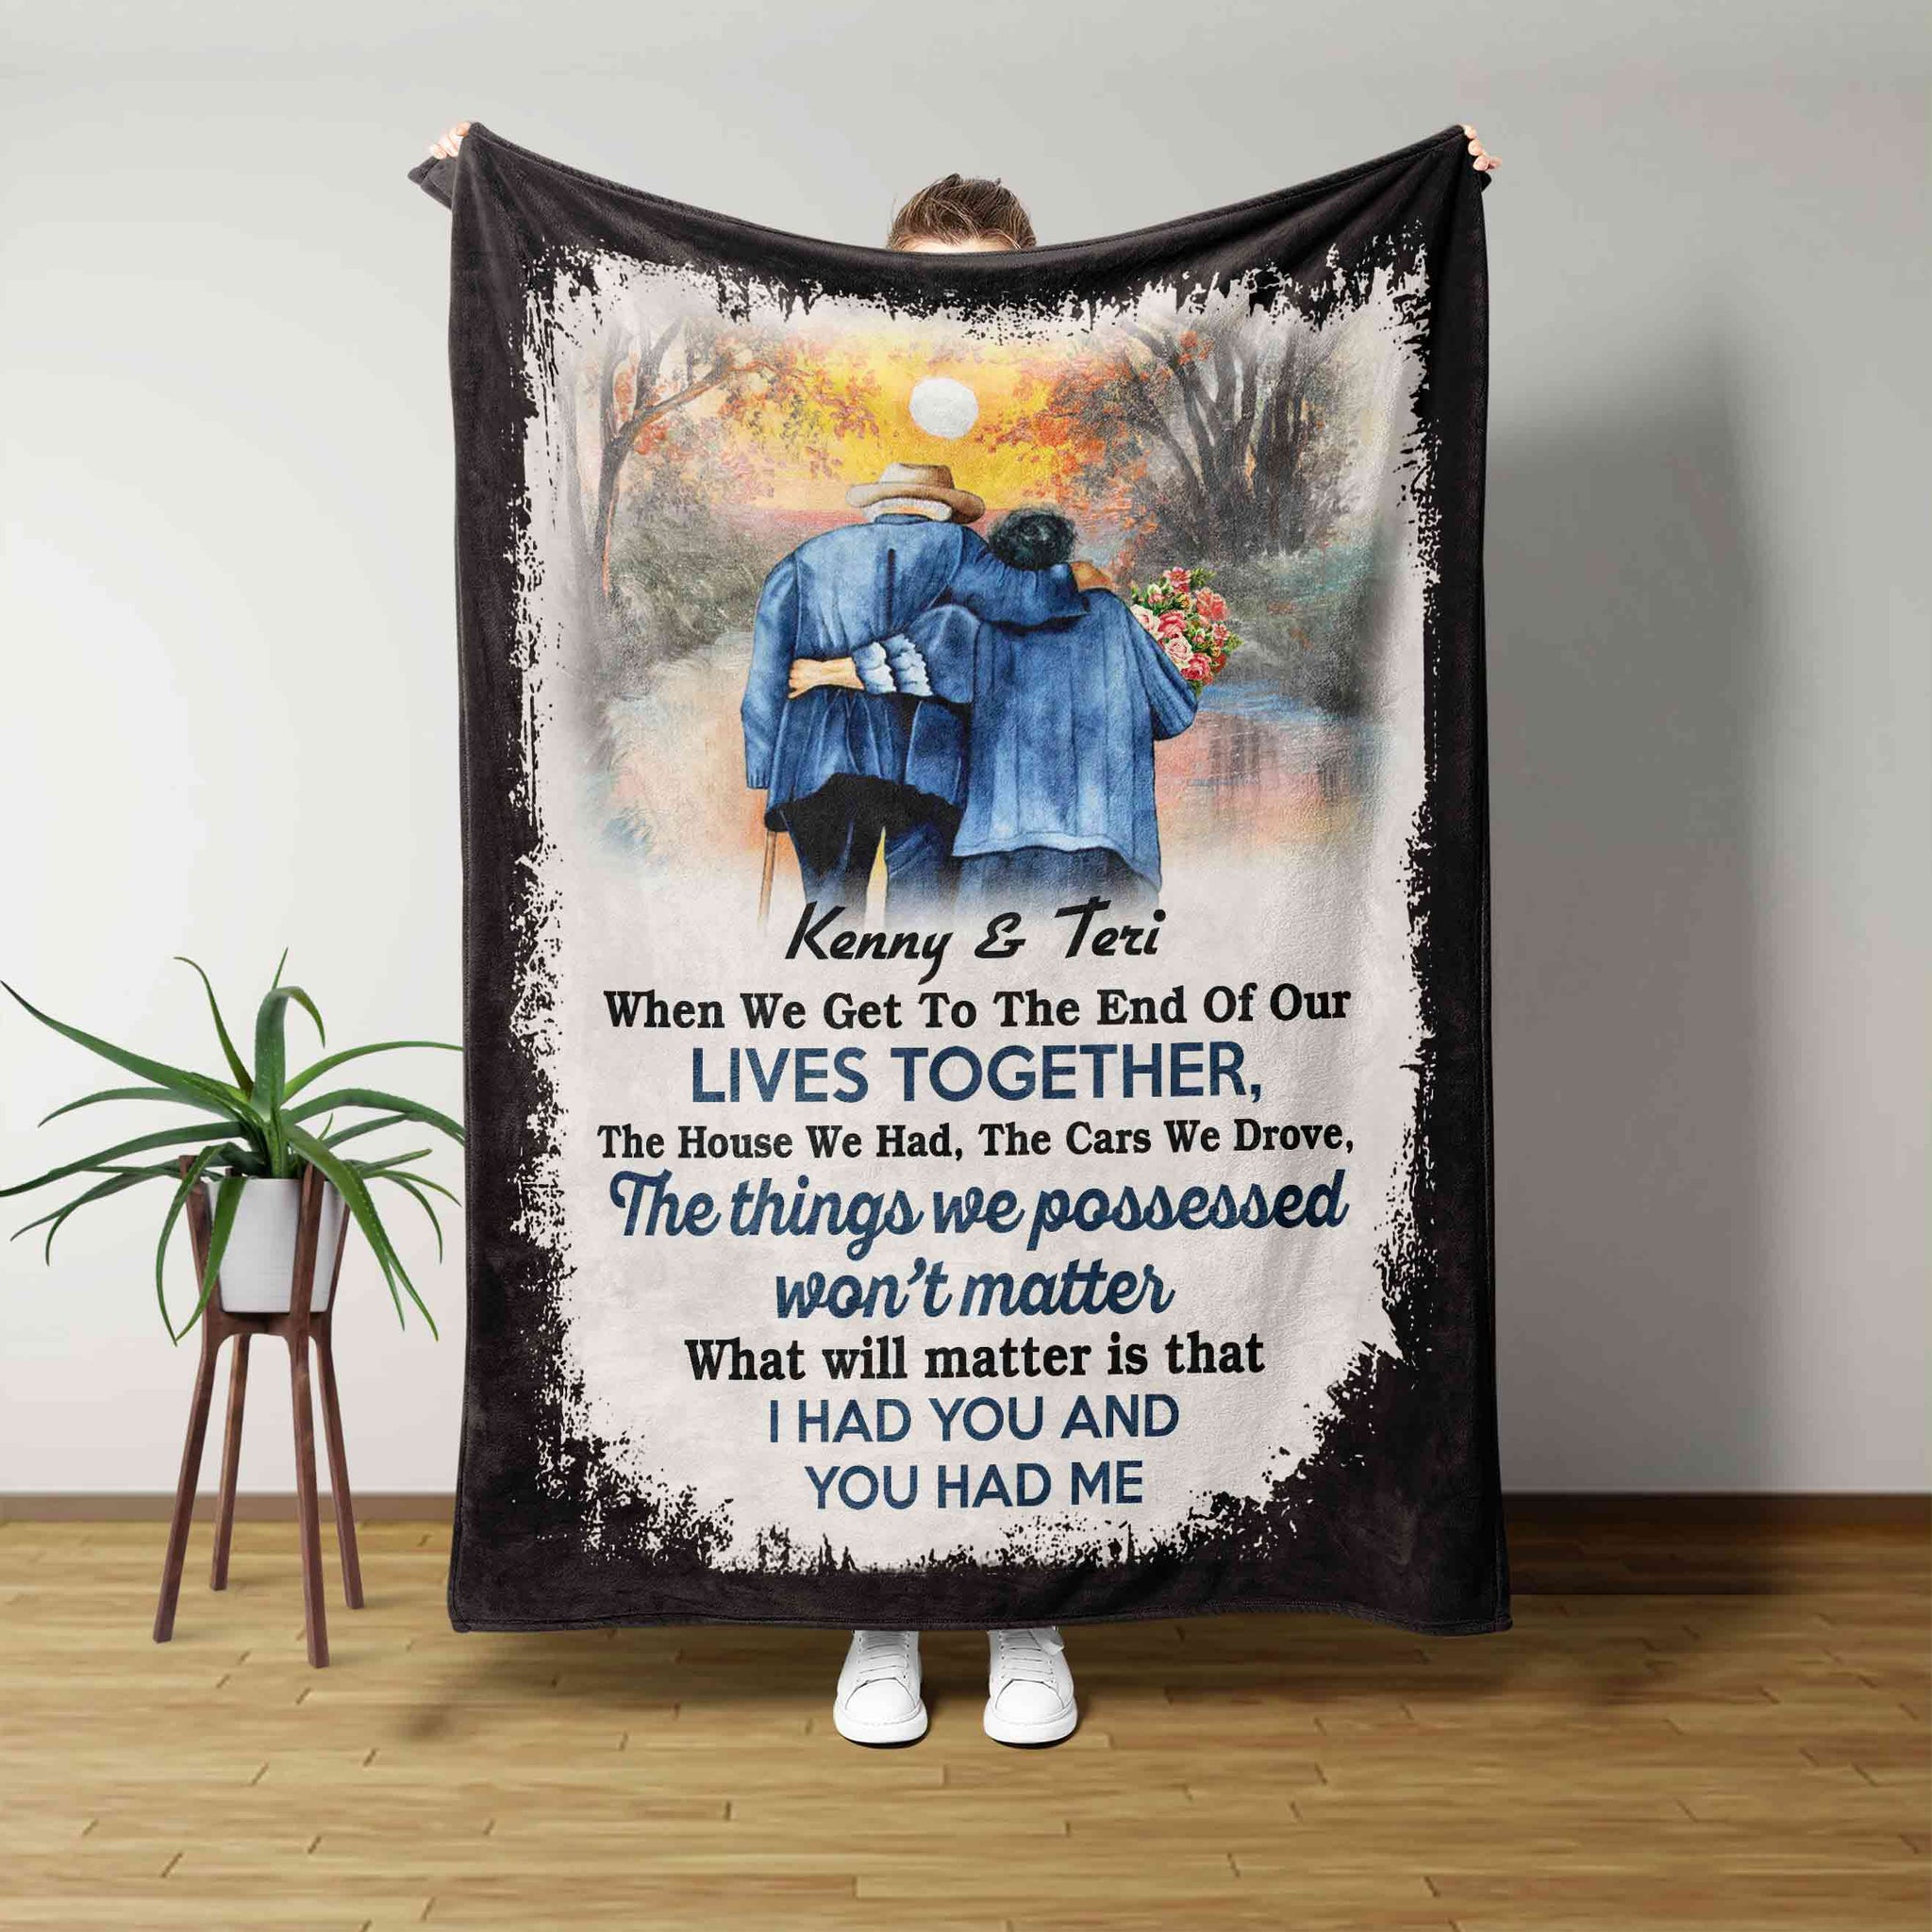 Personalized Name Blanket, When We Get To The End Of Our Together Blanket, Sunset Blanket, Flower Blanket, Gift Blanket